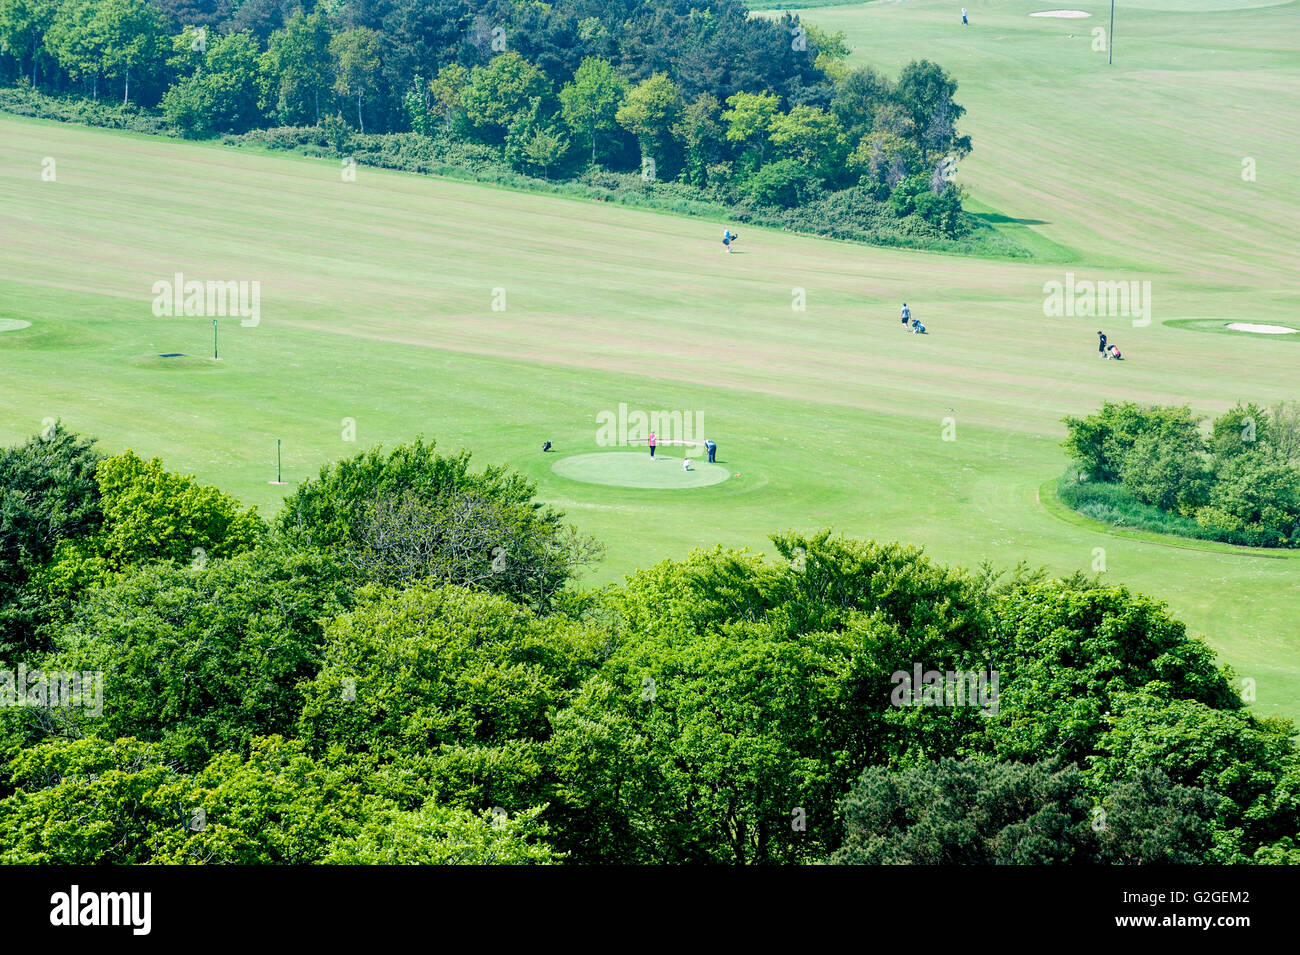 Dublin,Ireland - May 29, 2016. View from top of the hill on Golf course Deerpark Stock Photo